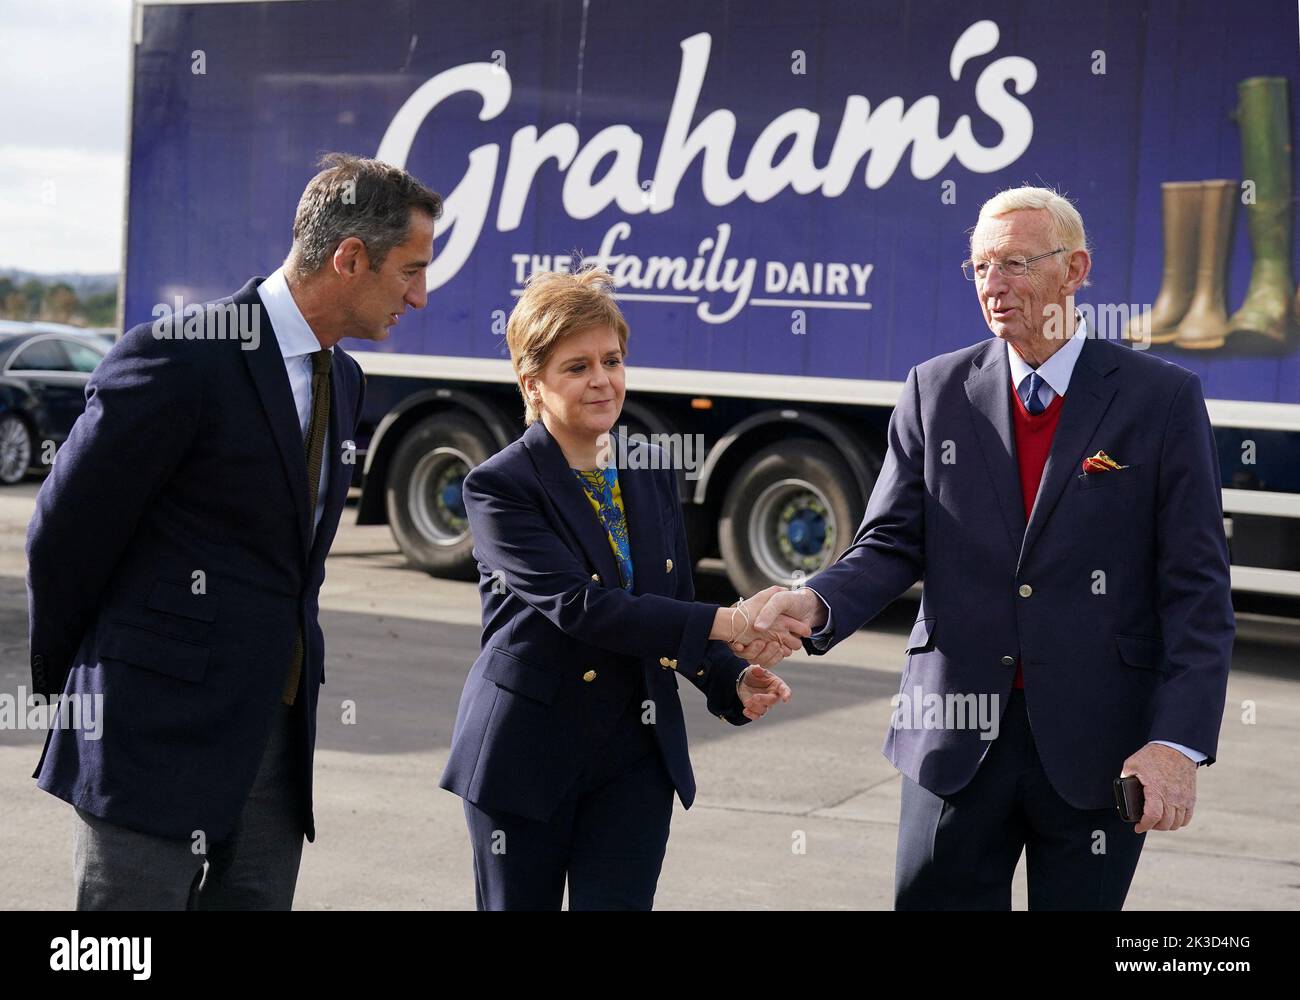 Scottish First Minister Nicola Sturgeon shakes hands with Chairman Dr Robert Graham while Managing Director Robert Graham looks on during a visit to Graham's The Family Dairy to mark the start of Scotland's Climate Week, as she announces funding to help companies decarbonise, in Bridge of Allan, Stirling, Scotland, Britain September 26, 2022. Andrew Milligan/Pool via REUTERS Stock Photo